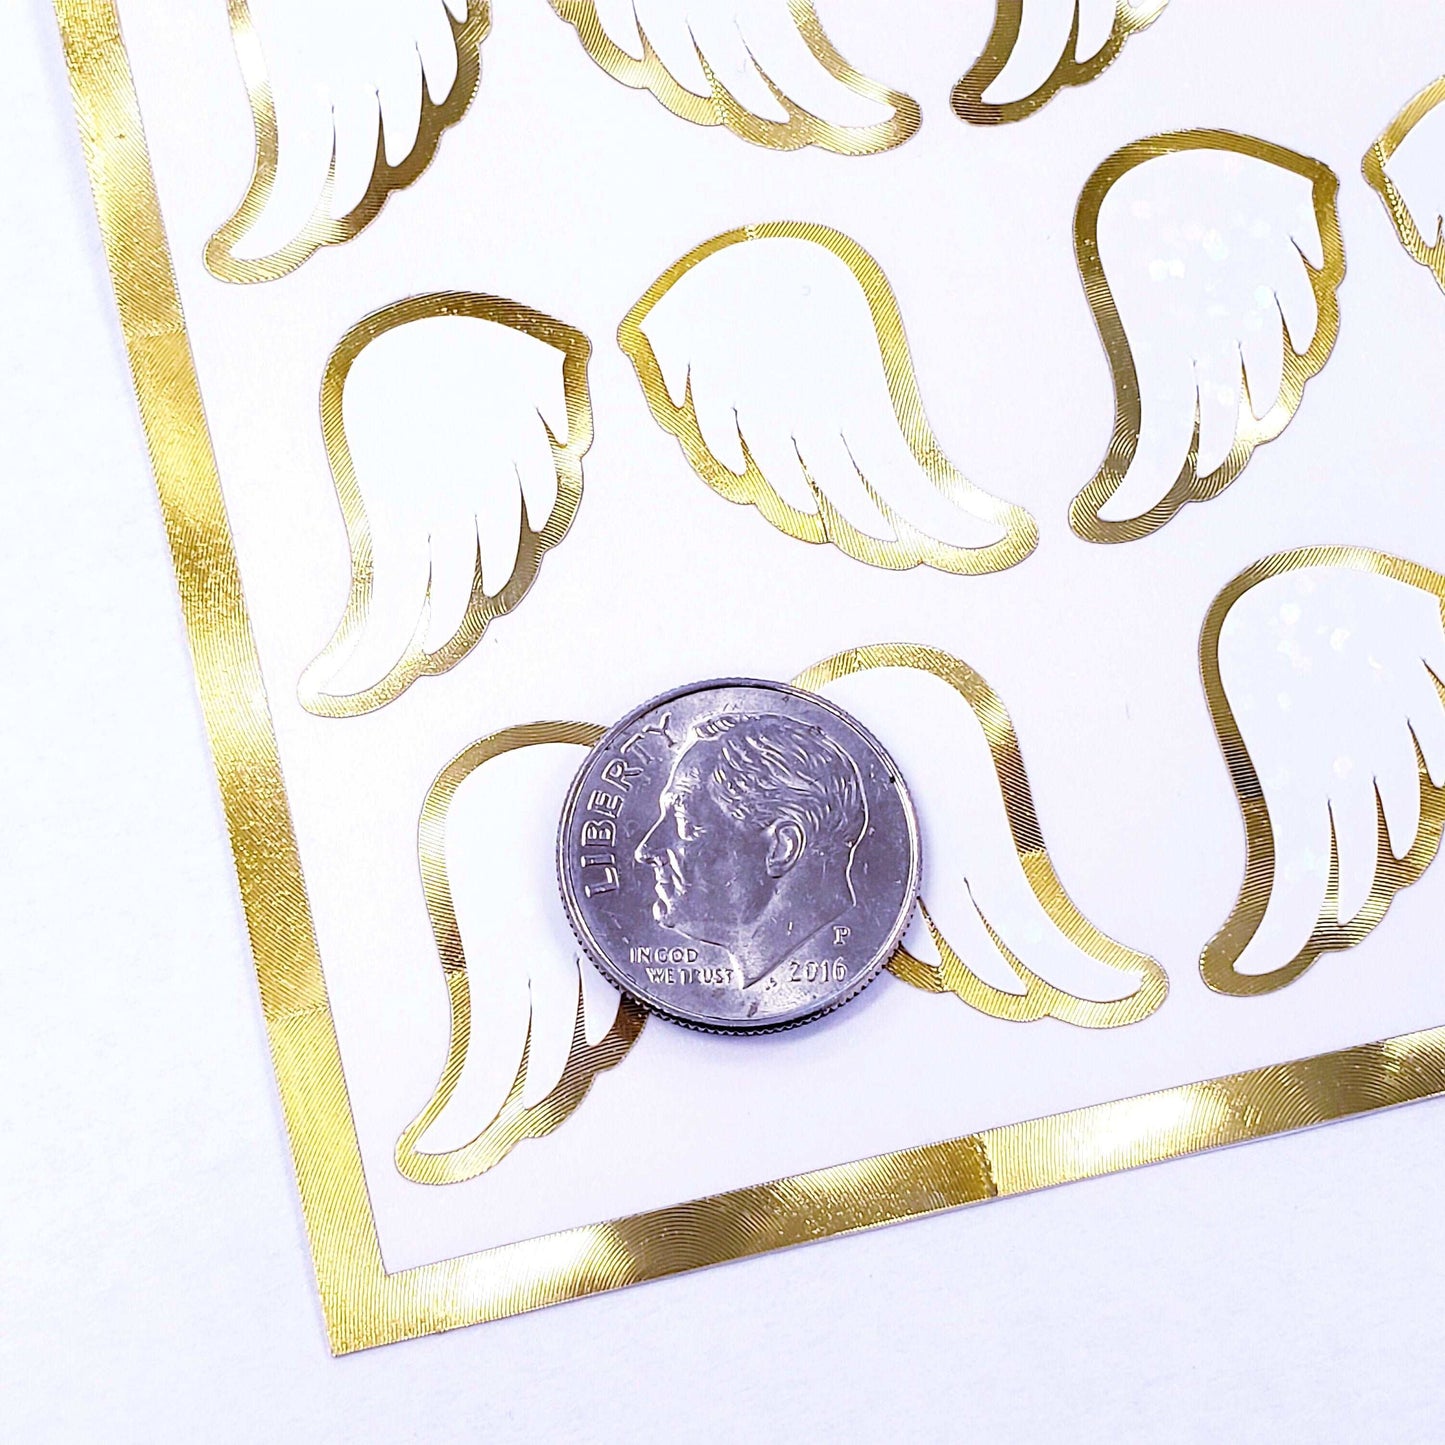 Gold Angel Wing Stickers, set of 42 white and gold wing stickers for invitations, envelopes, memorial cards, planners, journals and crafts.